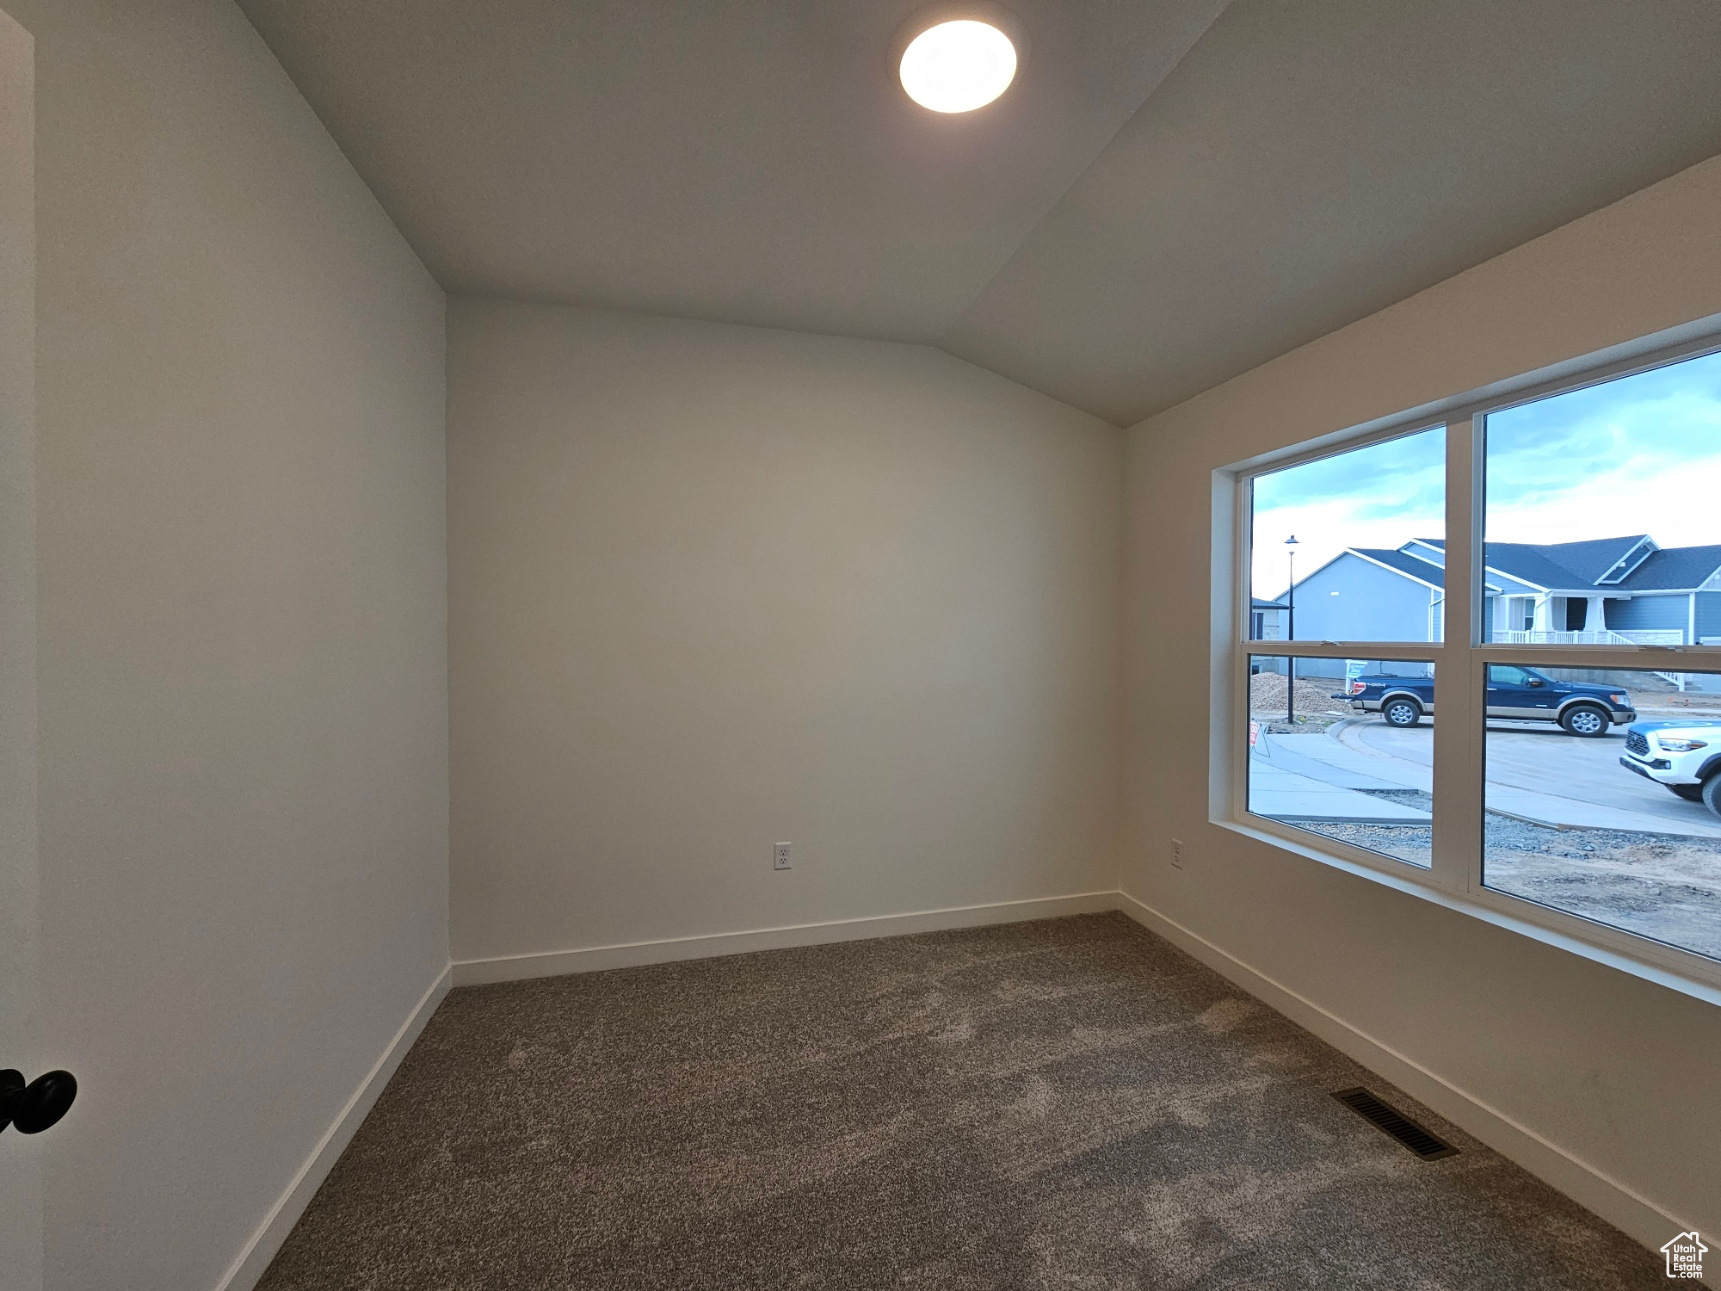 Empty room featuring carpet floors and lofted ceiling